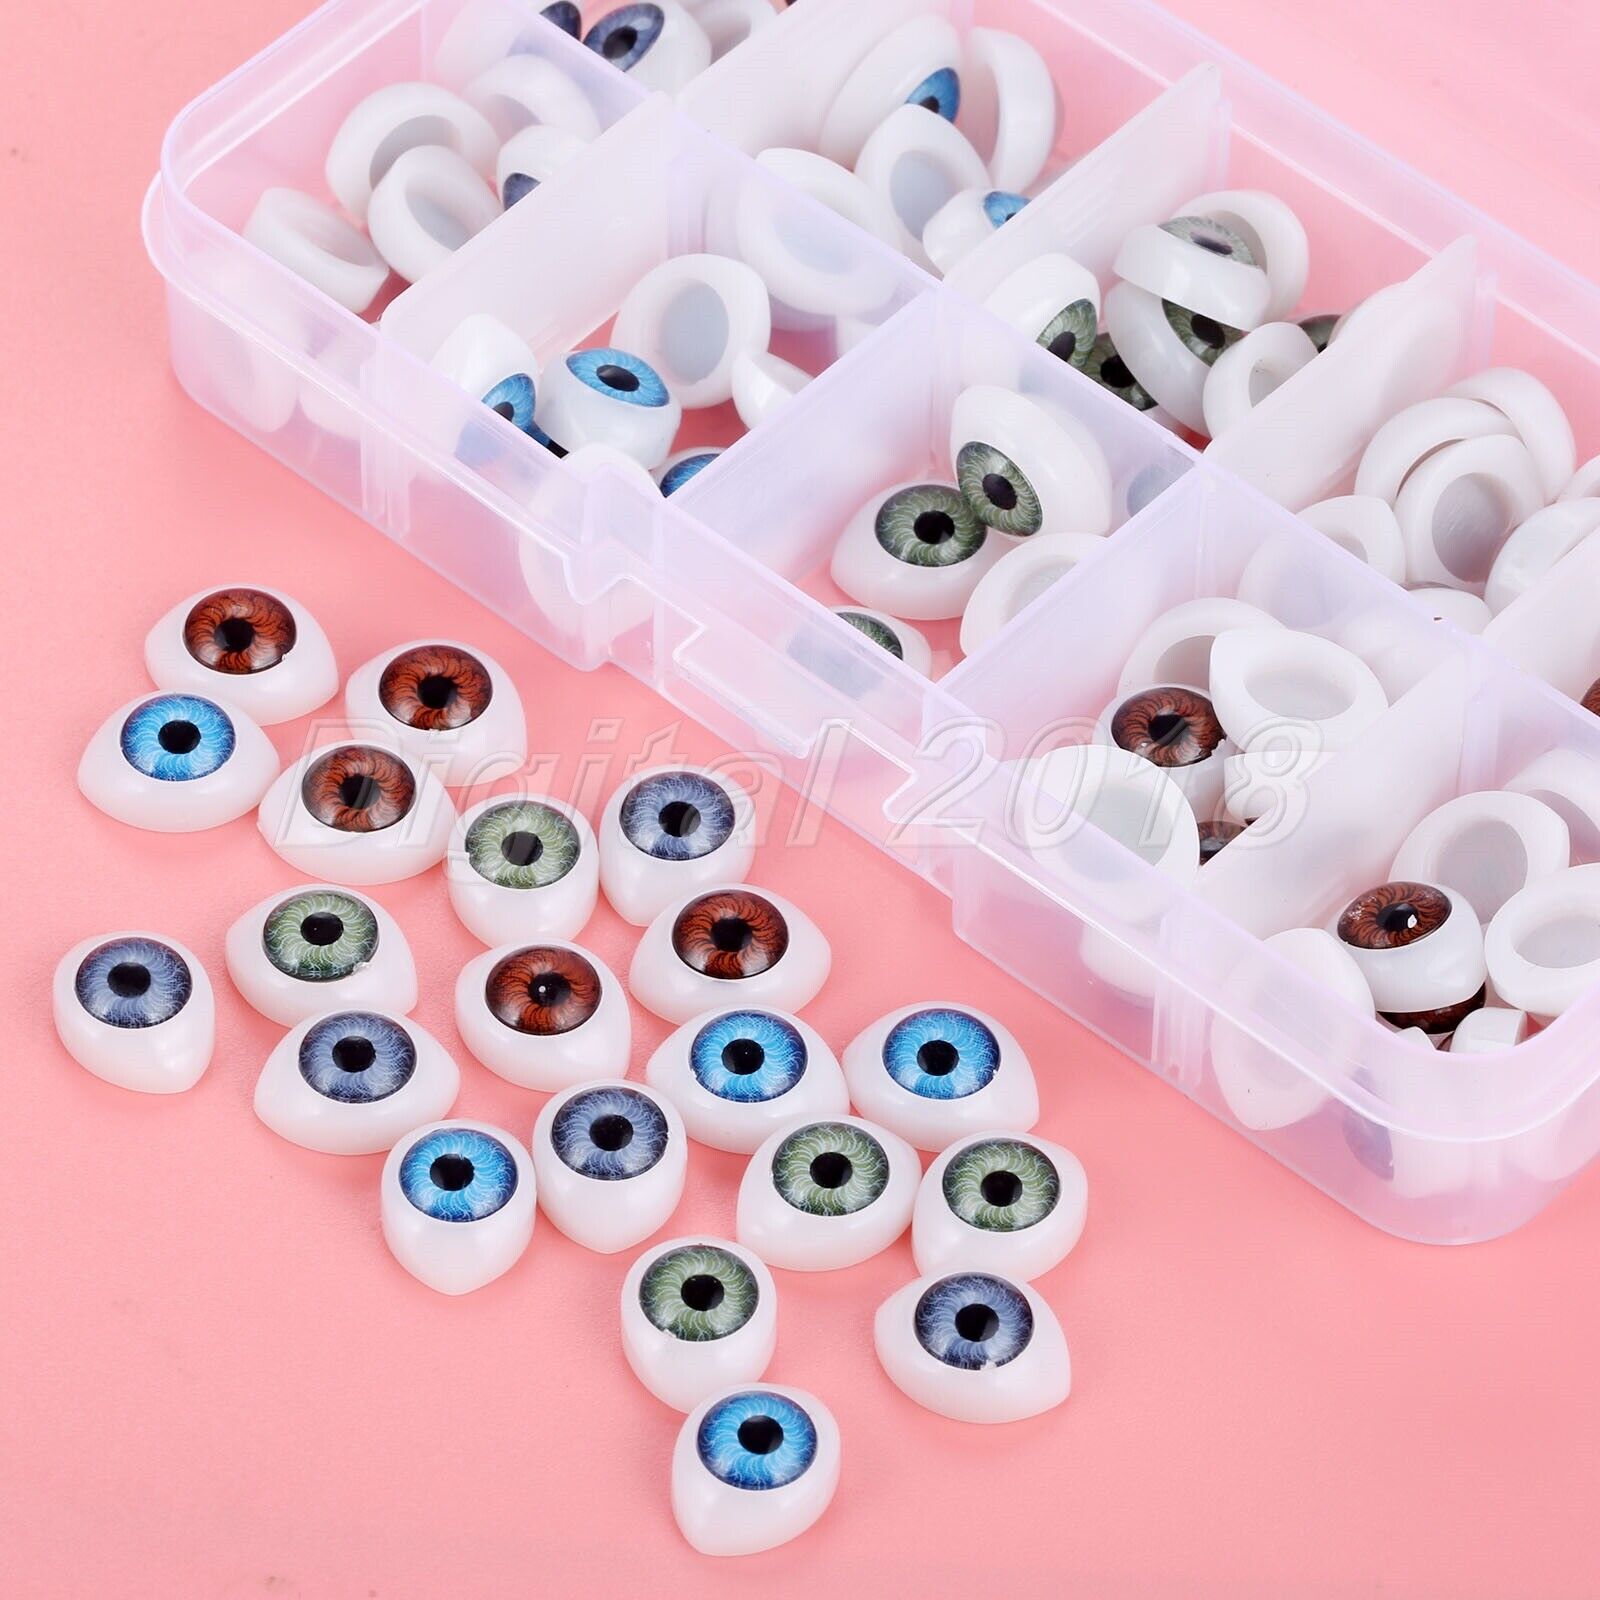 100Pcs 0.47"*0.63" Safety Doll Eyes Toys For Doll Making Eyes Doll Accessories Unbranded Does Not Apply - фотография #8